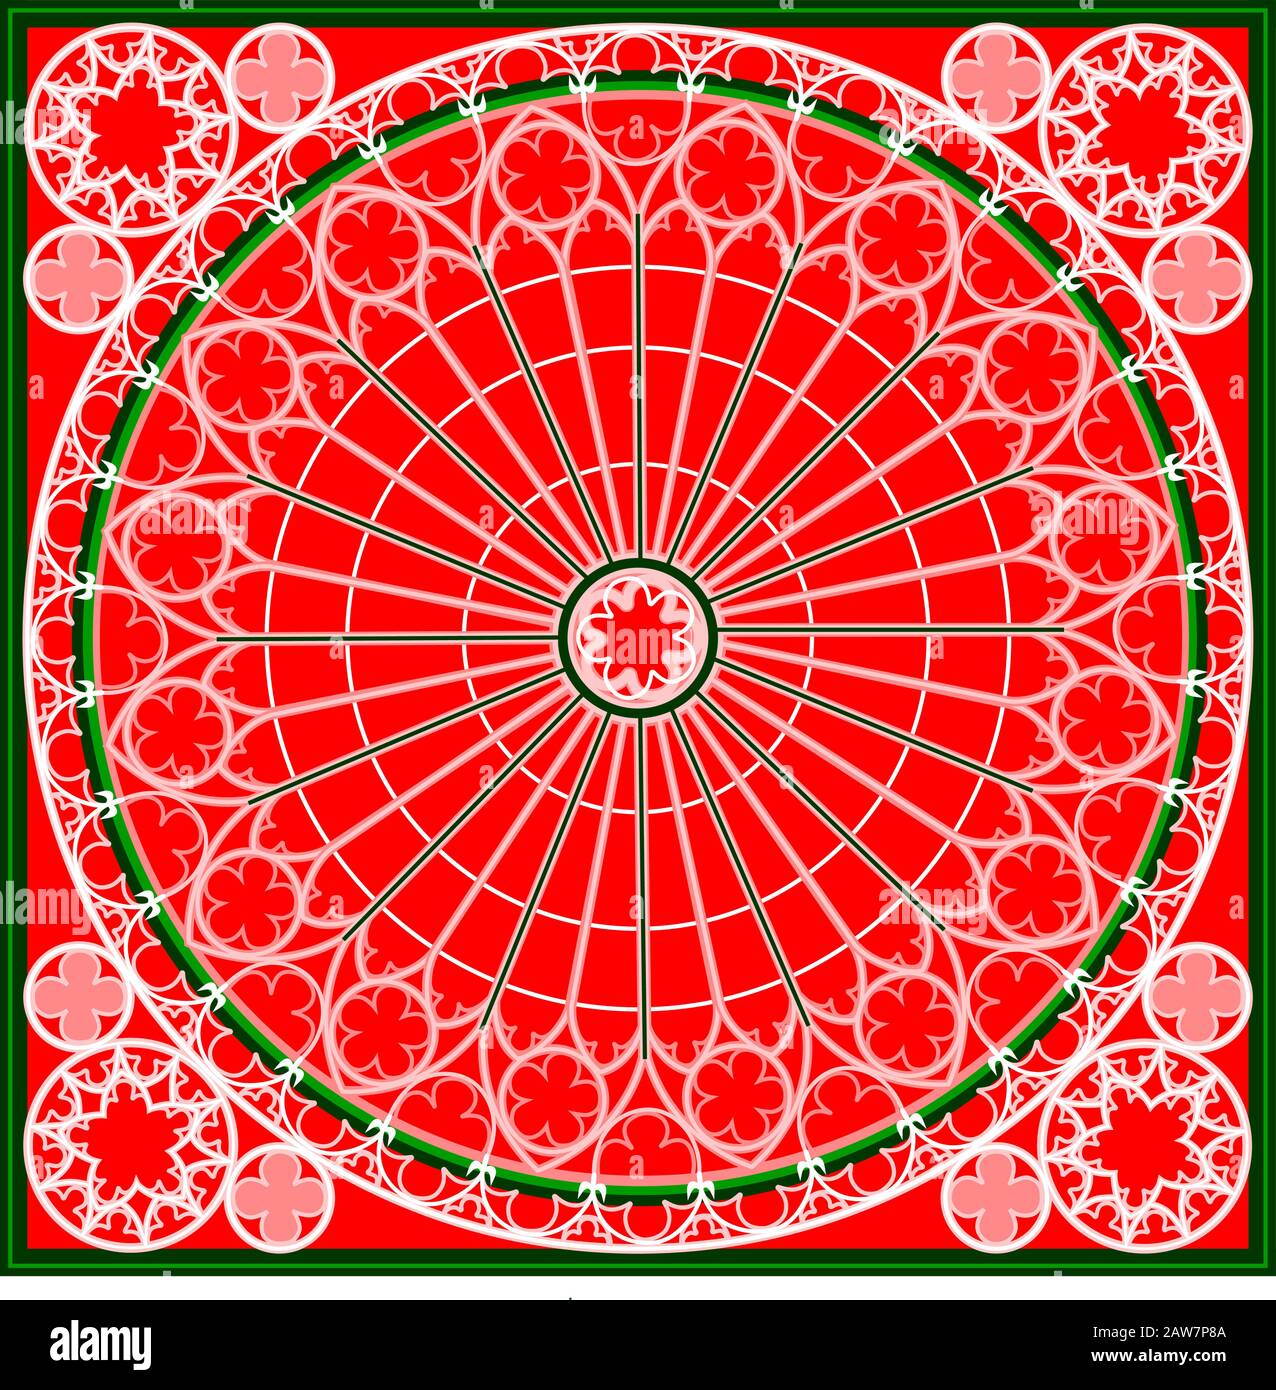 Red and green abstract lace background, square geometric pattern with ornate frame. Stock Vector